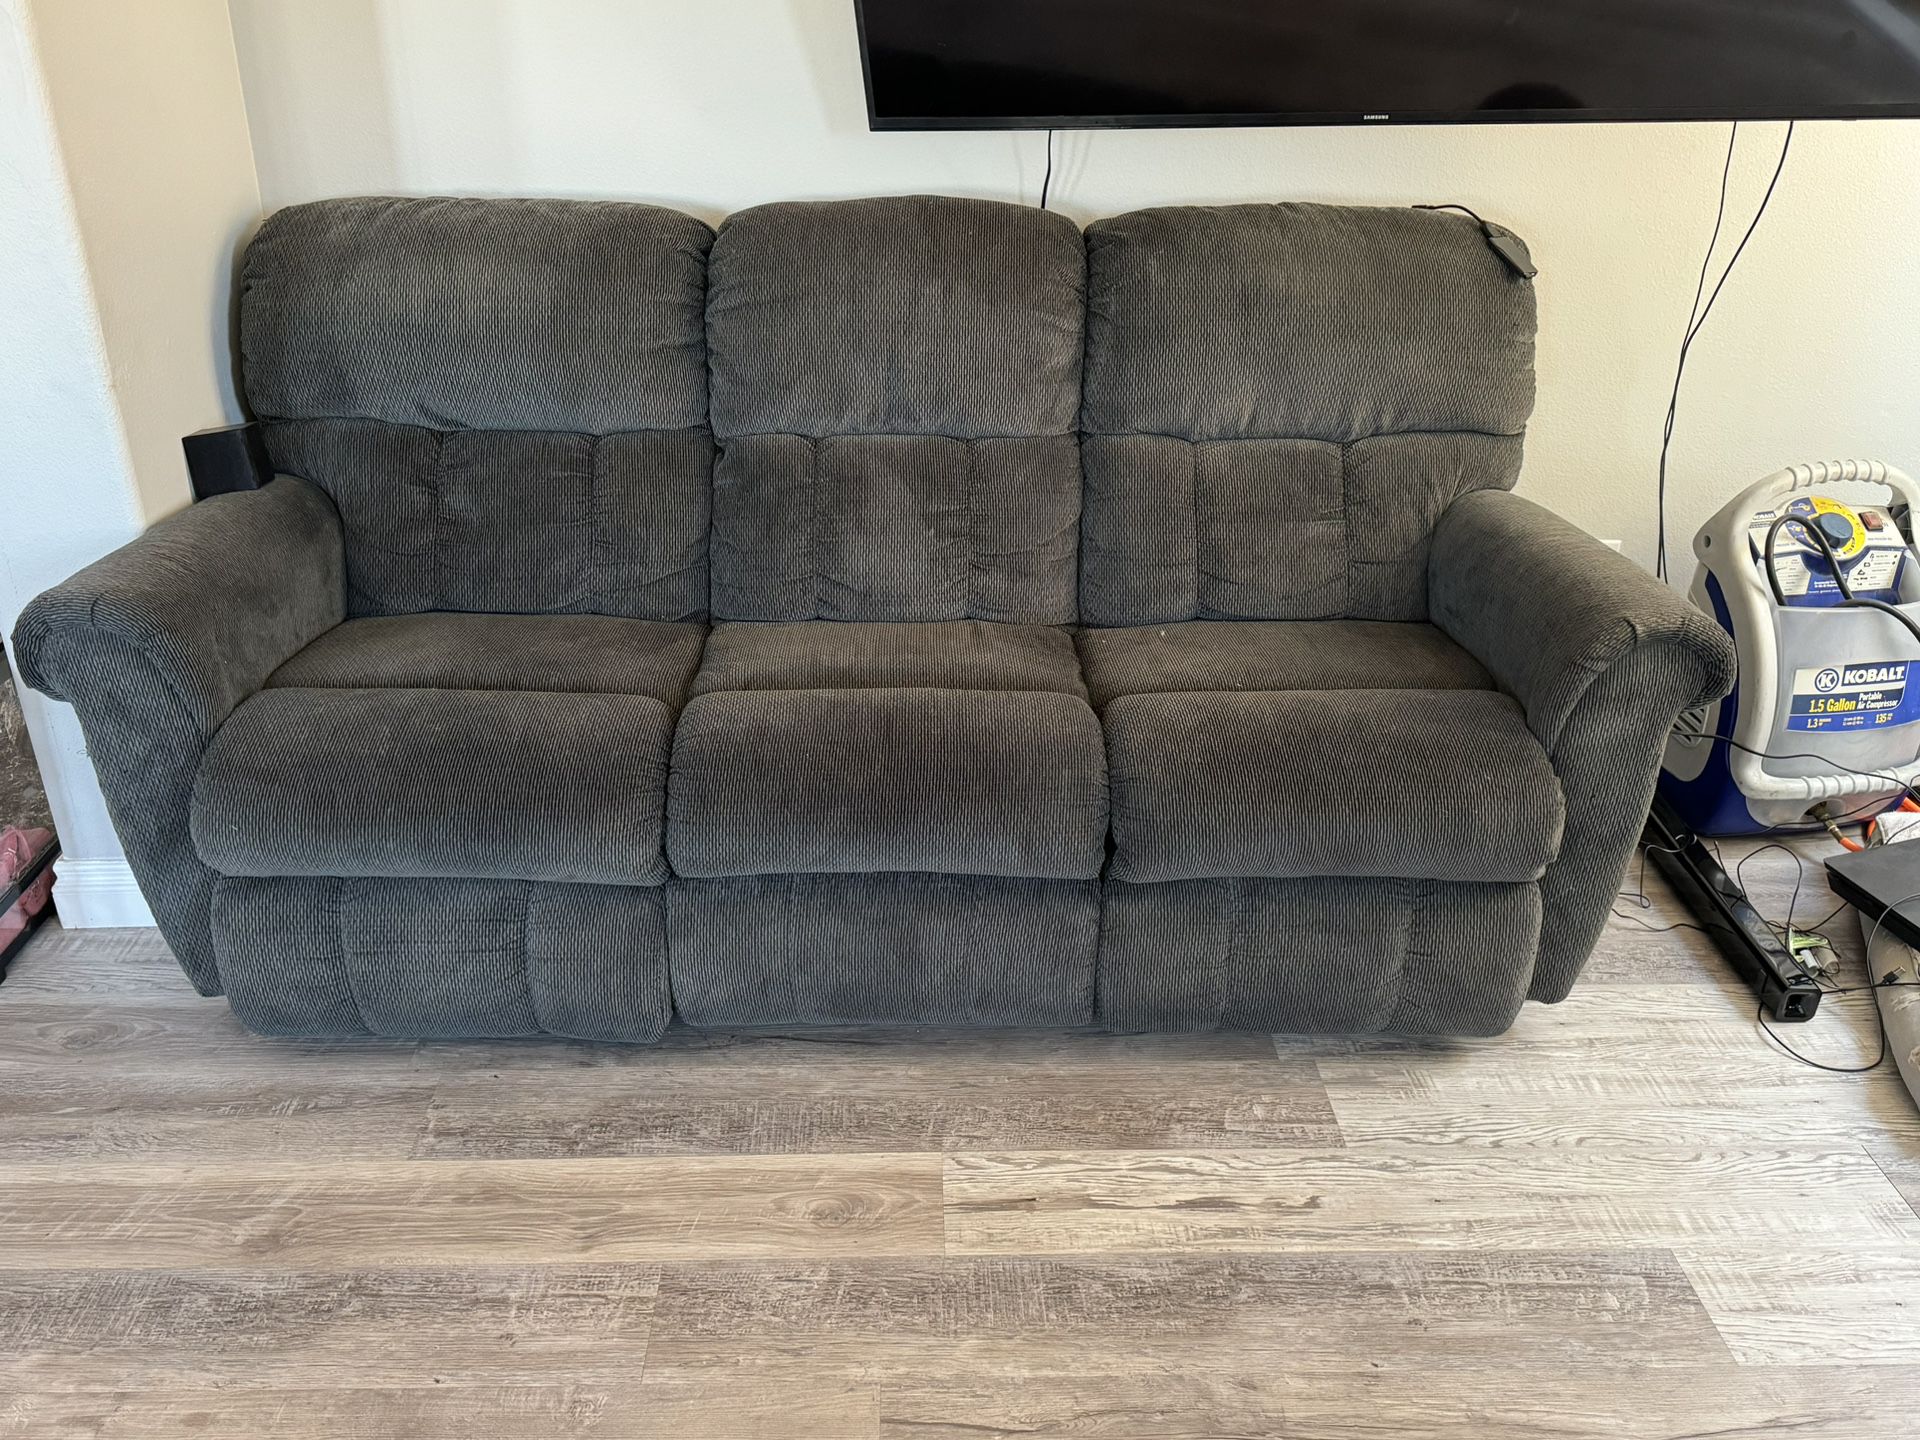 Recliner/couch